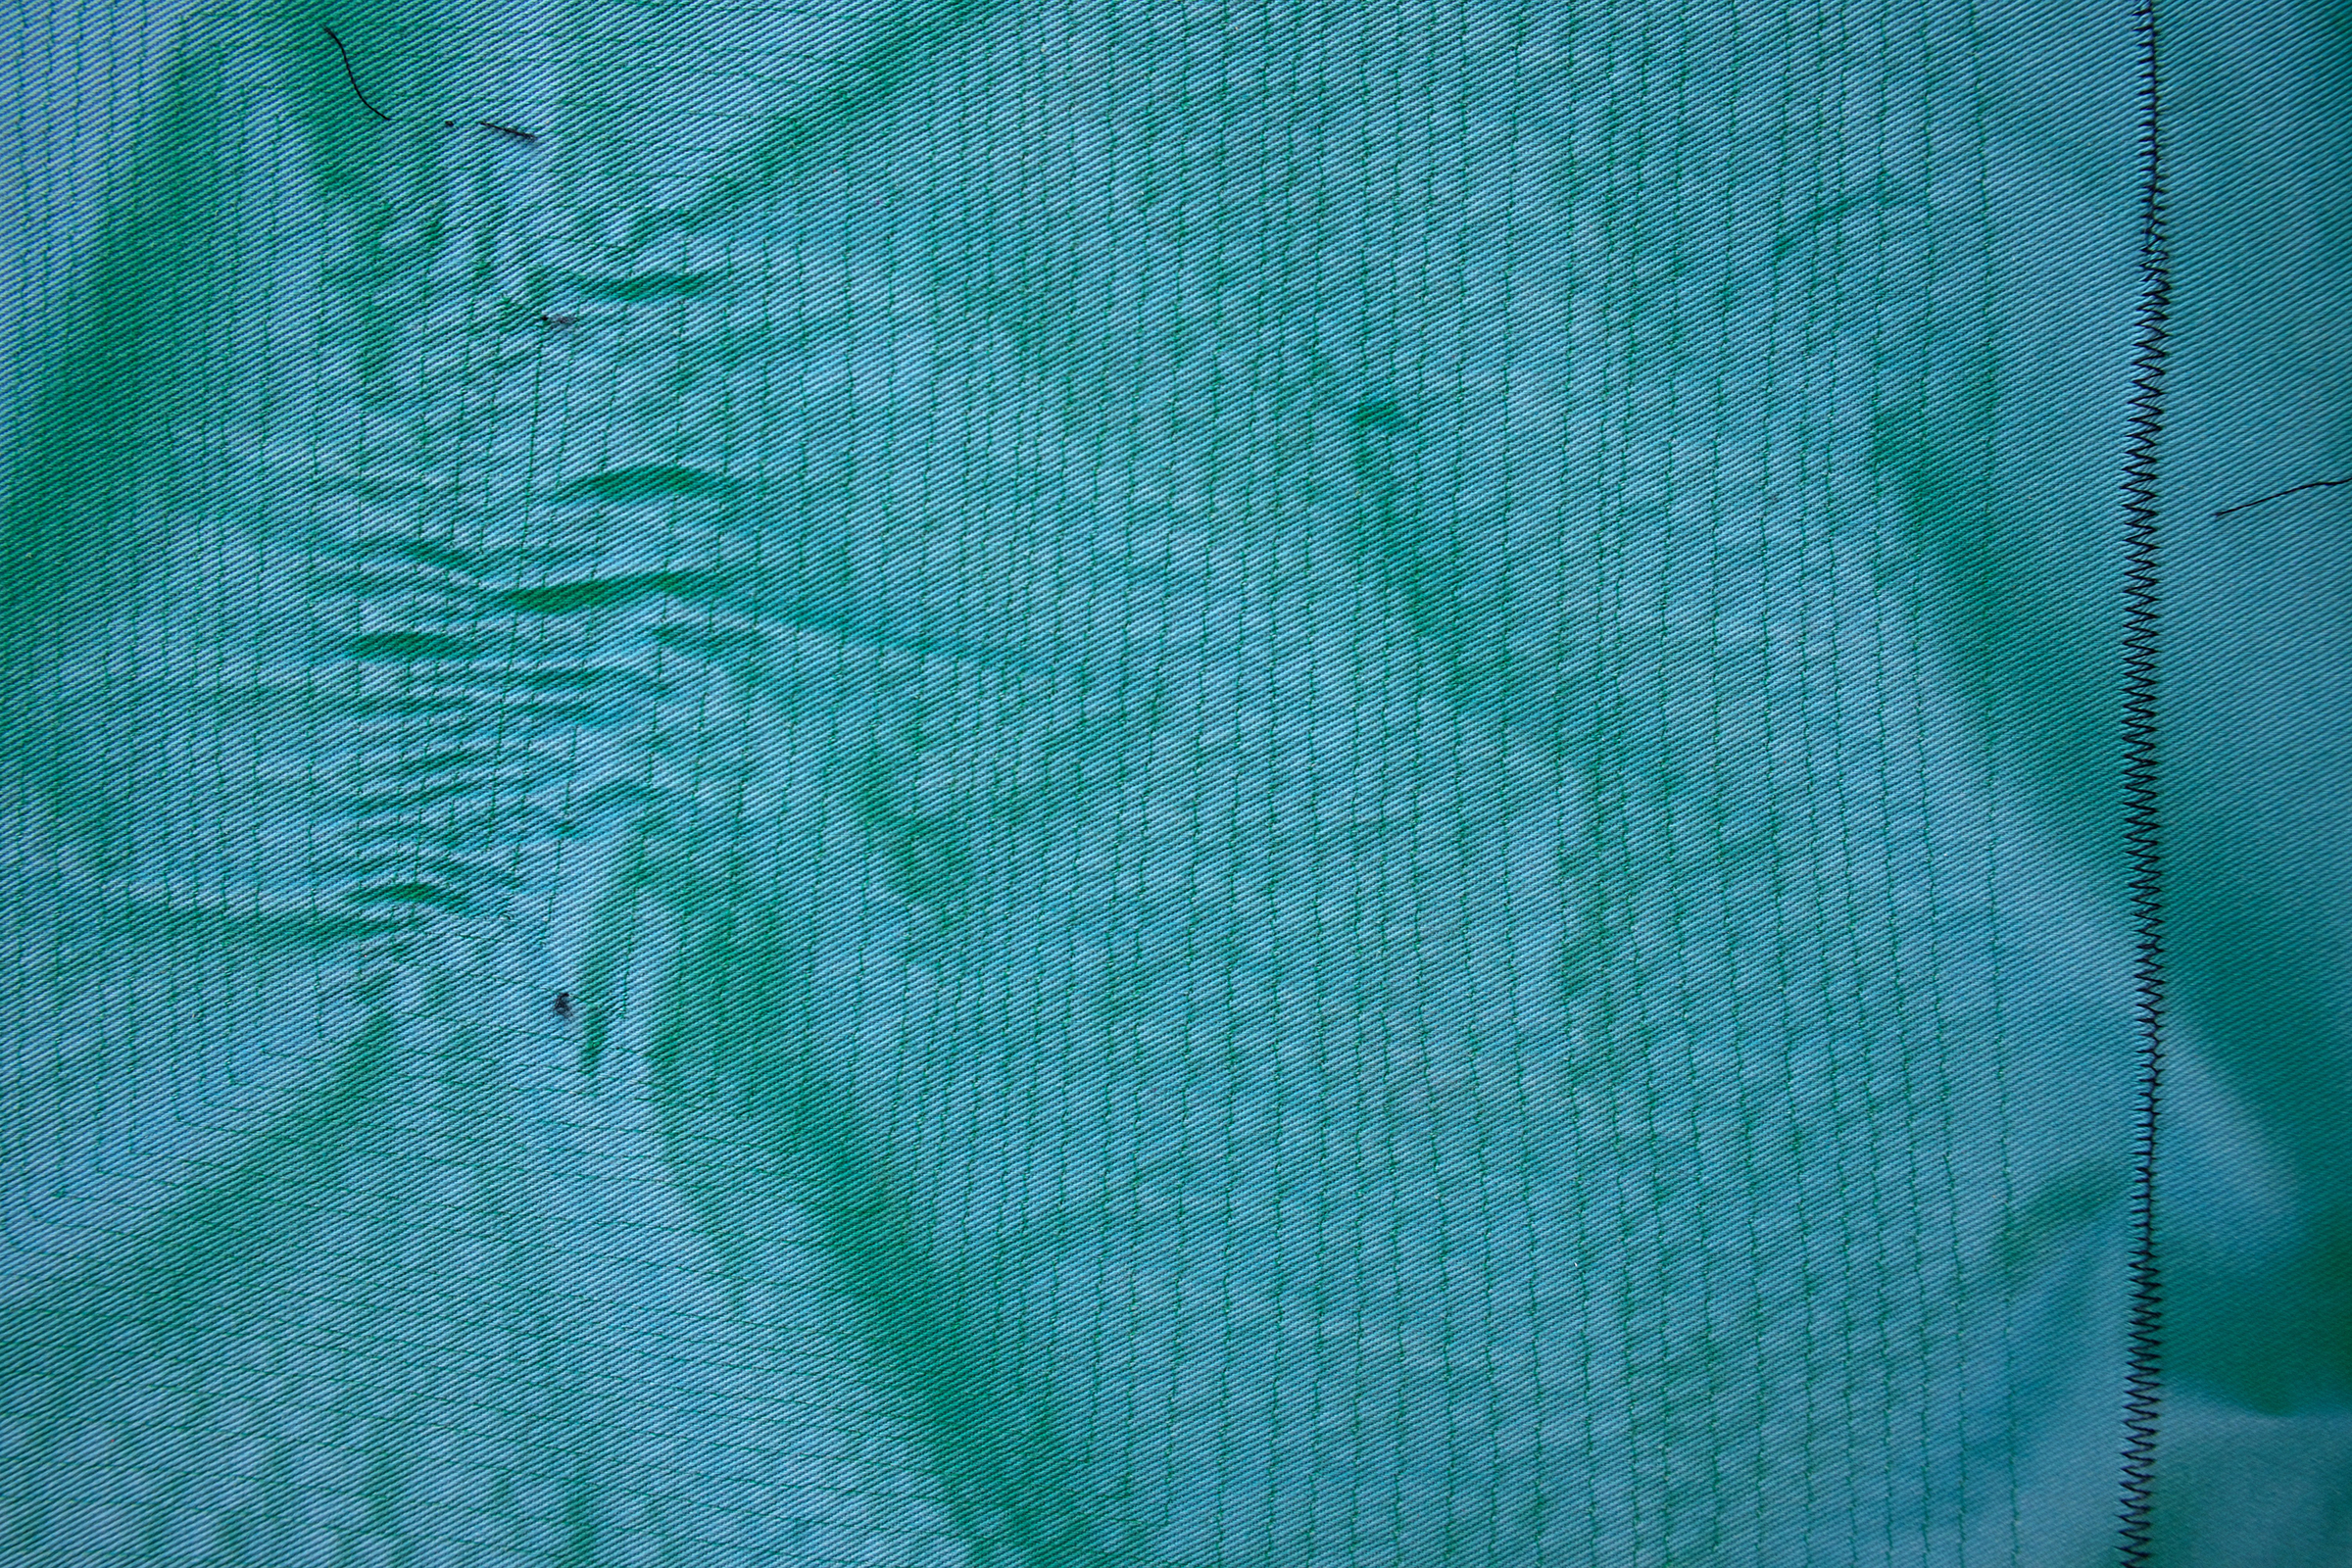   CHRIS DUNCAN  (detail) &nbsp;Ghost Pattern #3 (Summer/Winter 2016) Six-Month Exposure/Oakland , 2017, sun, time and thread on fabric, 20 1/2" x 17 3/8" 